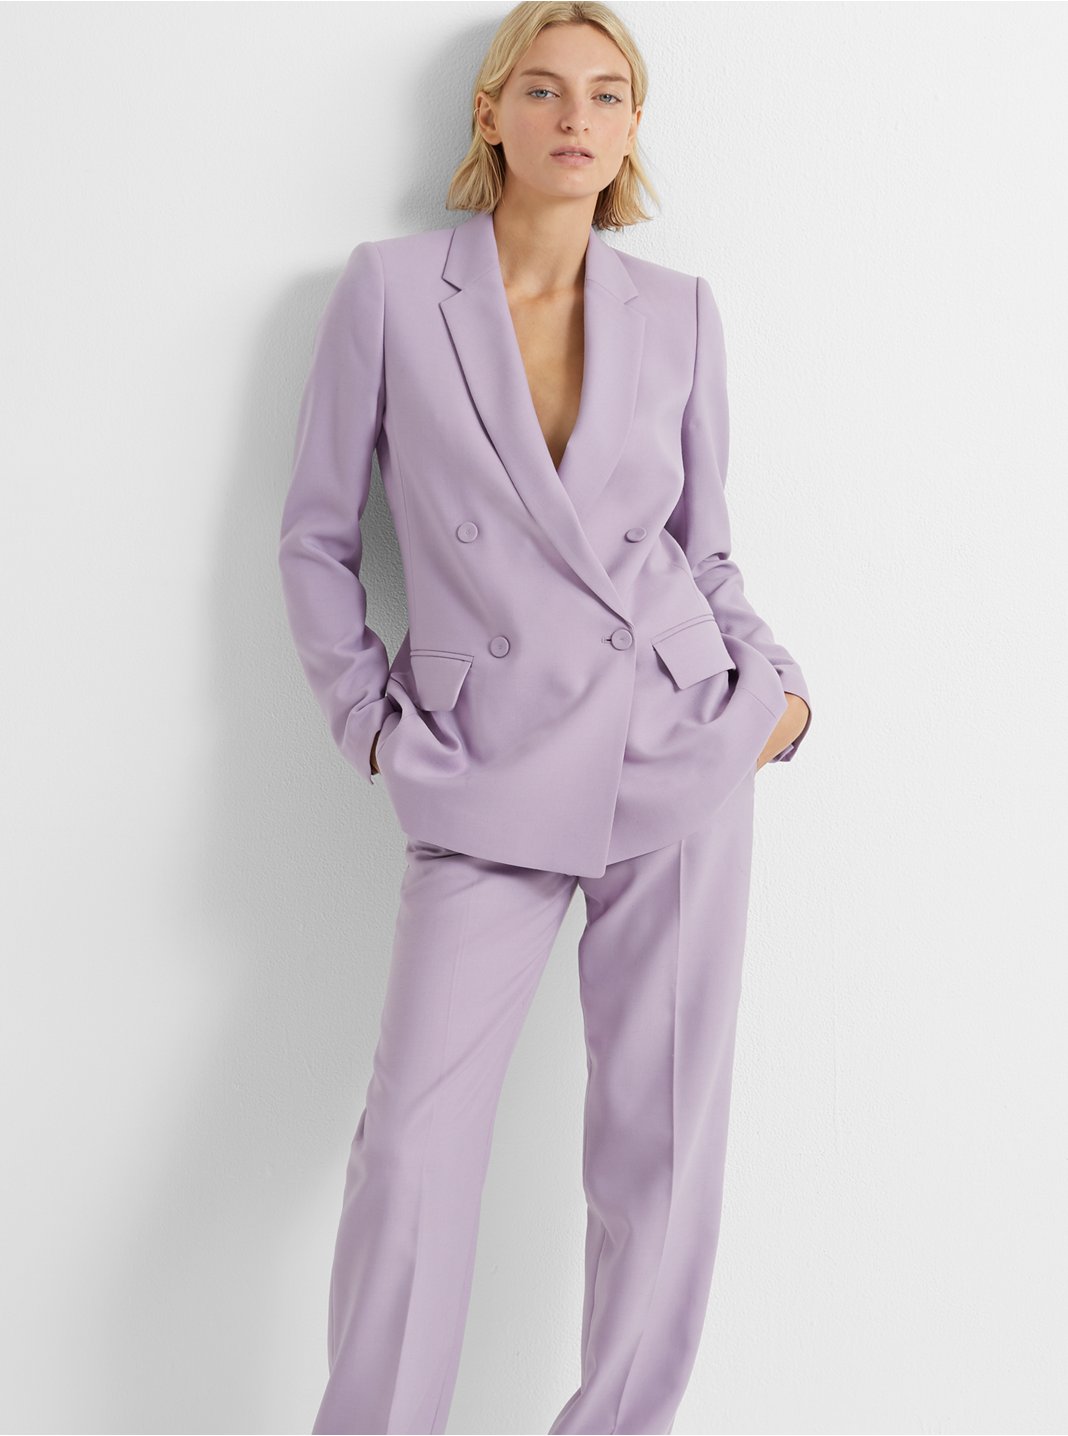 *Swap The Dresses For These Chic AF Suits This Easter